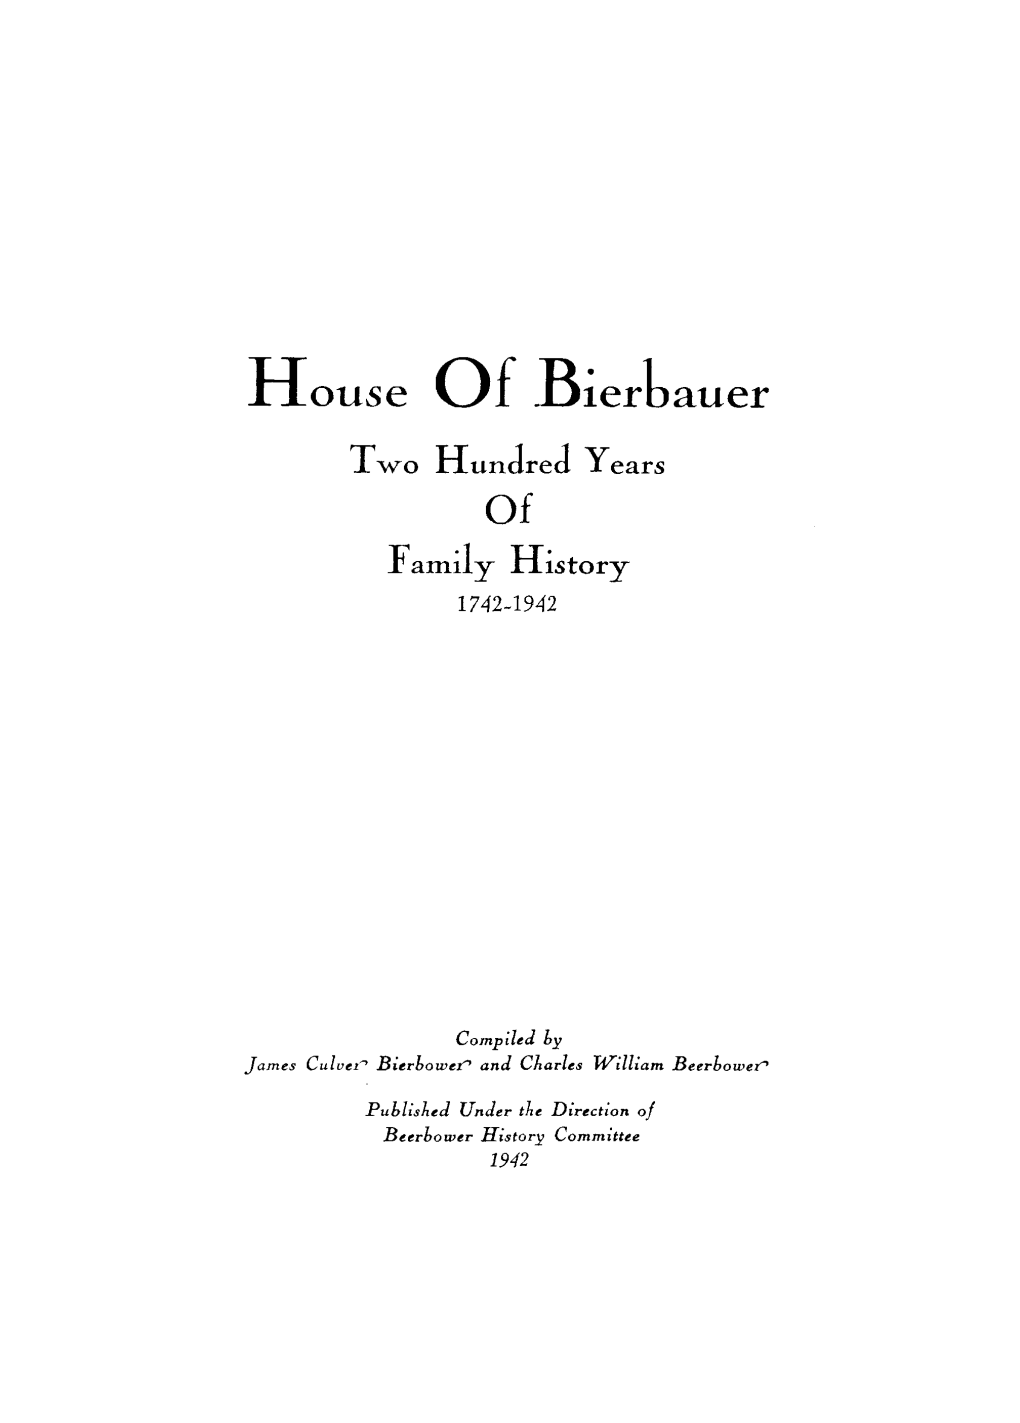 House of Bierbauer Two Hundred Years of Family History 1742-1942